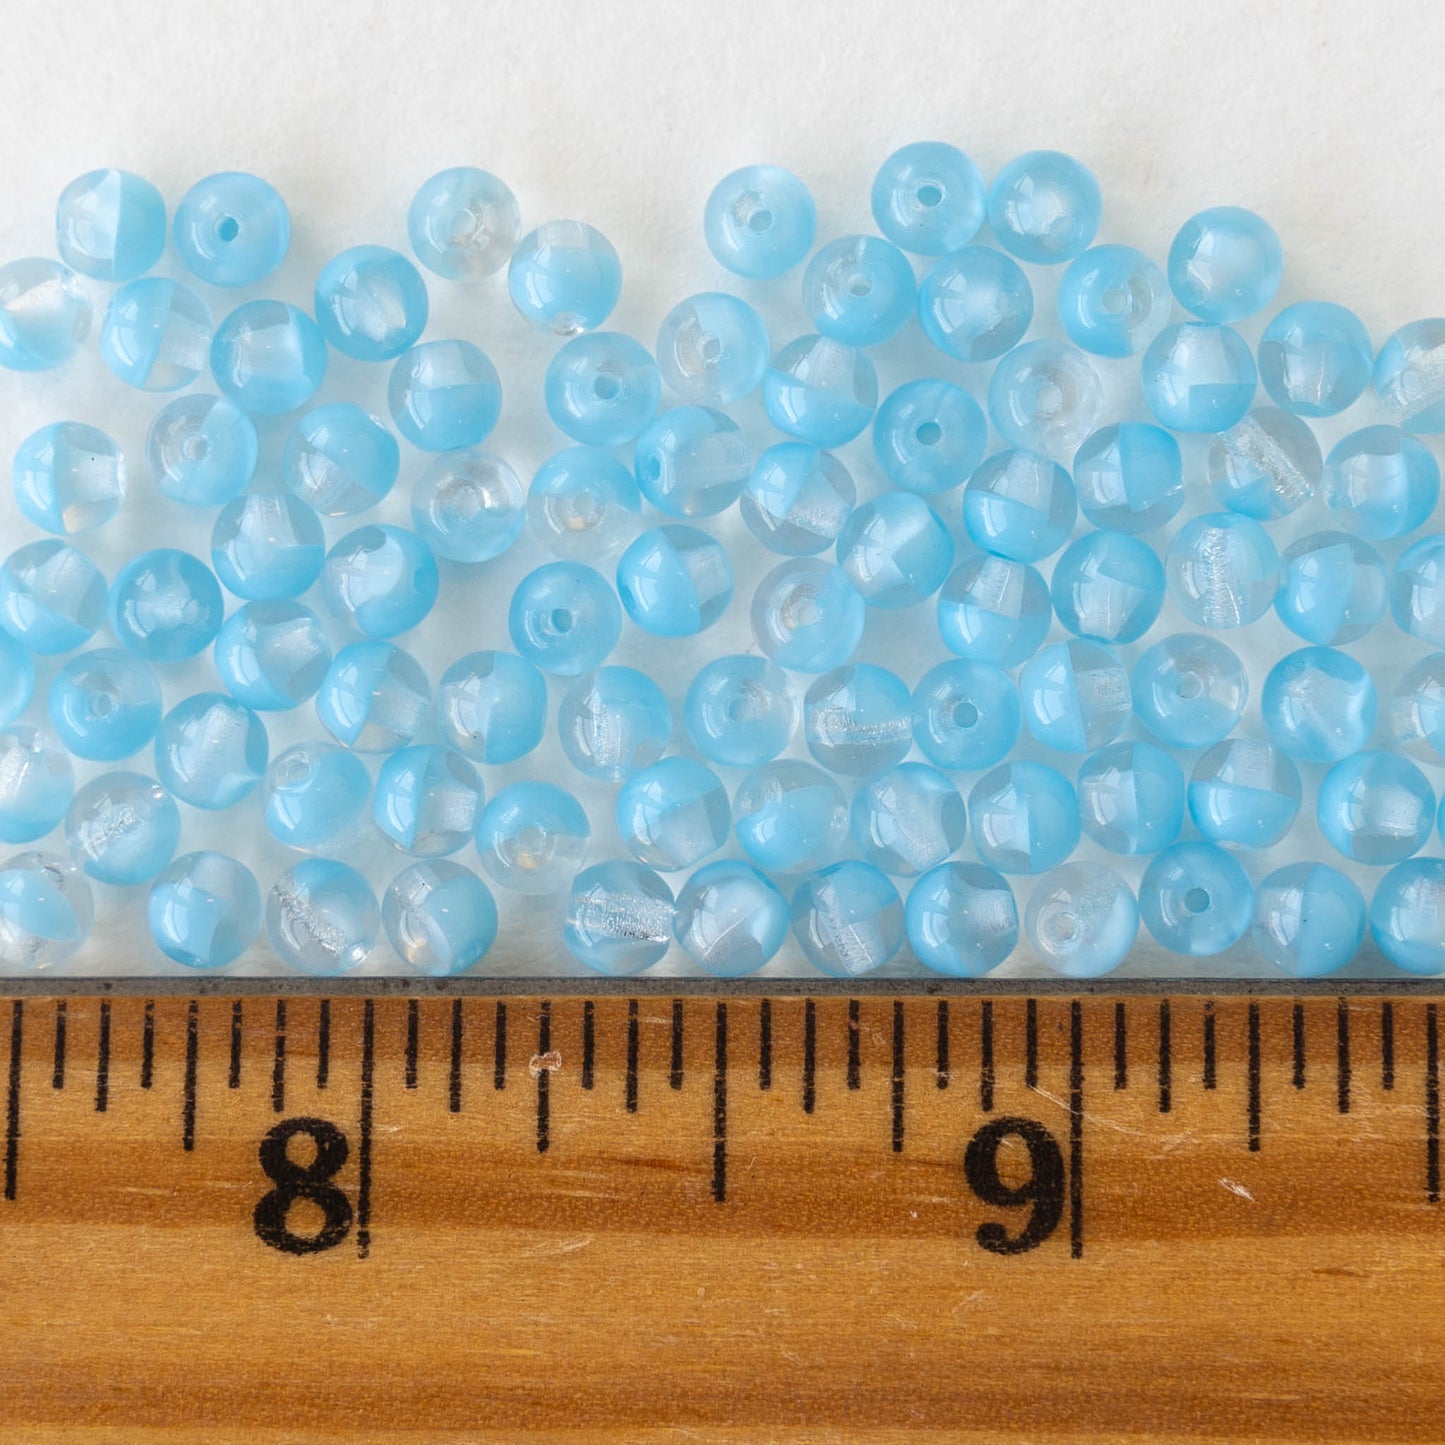 4mm Round Glass Beads - Blue Crystal Marble - 100 Beads